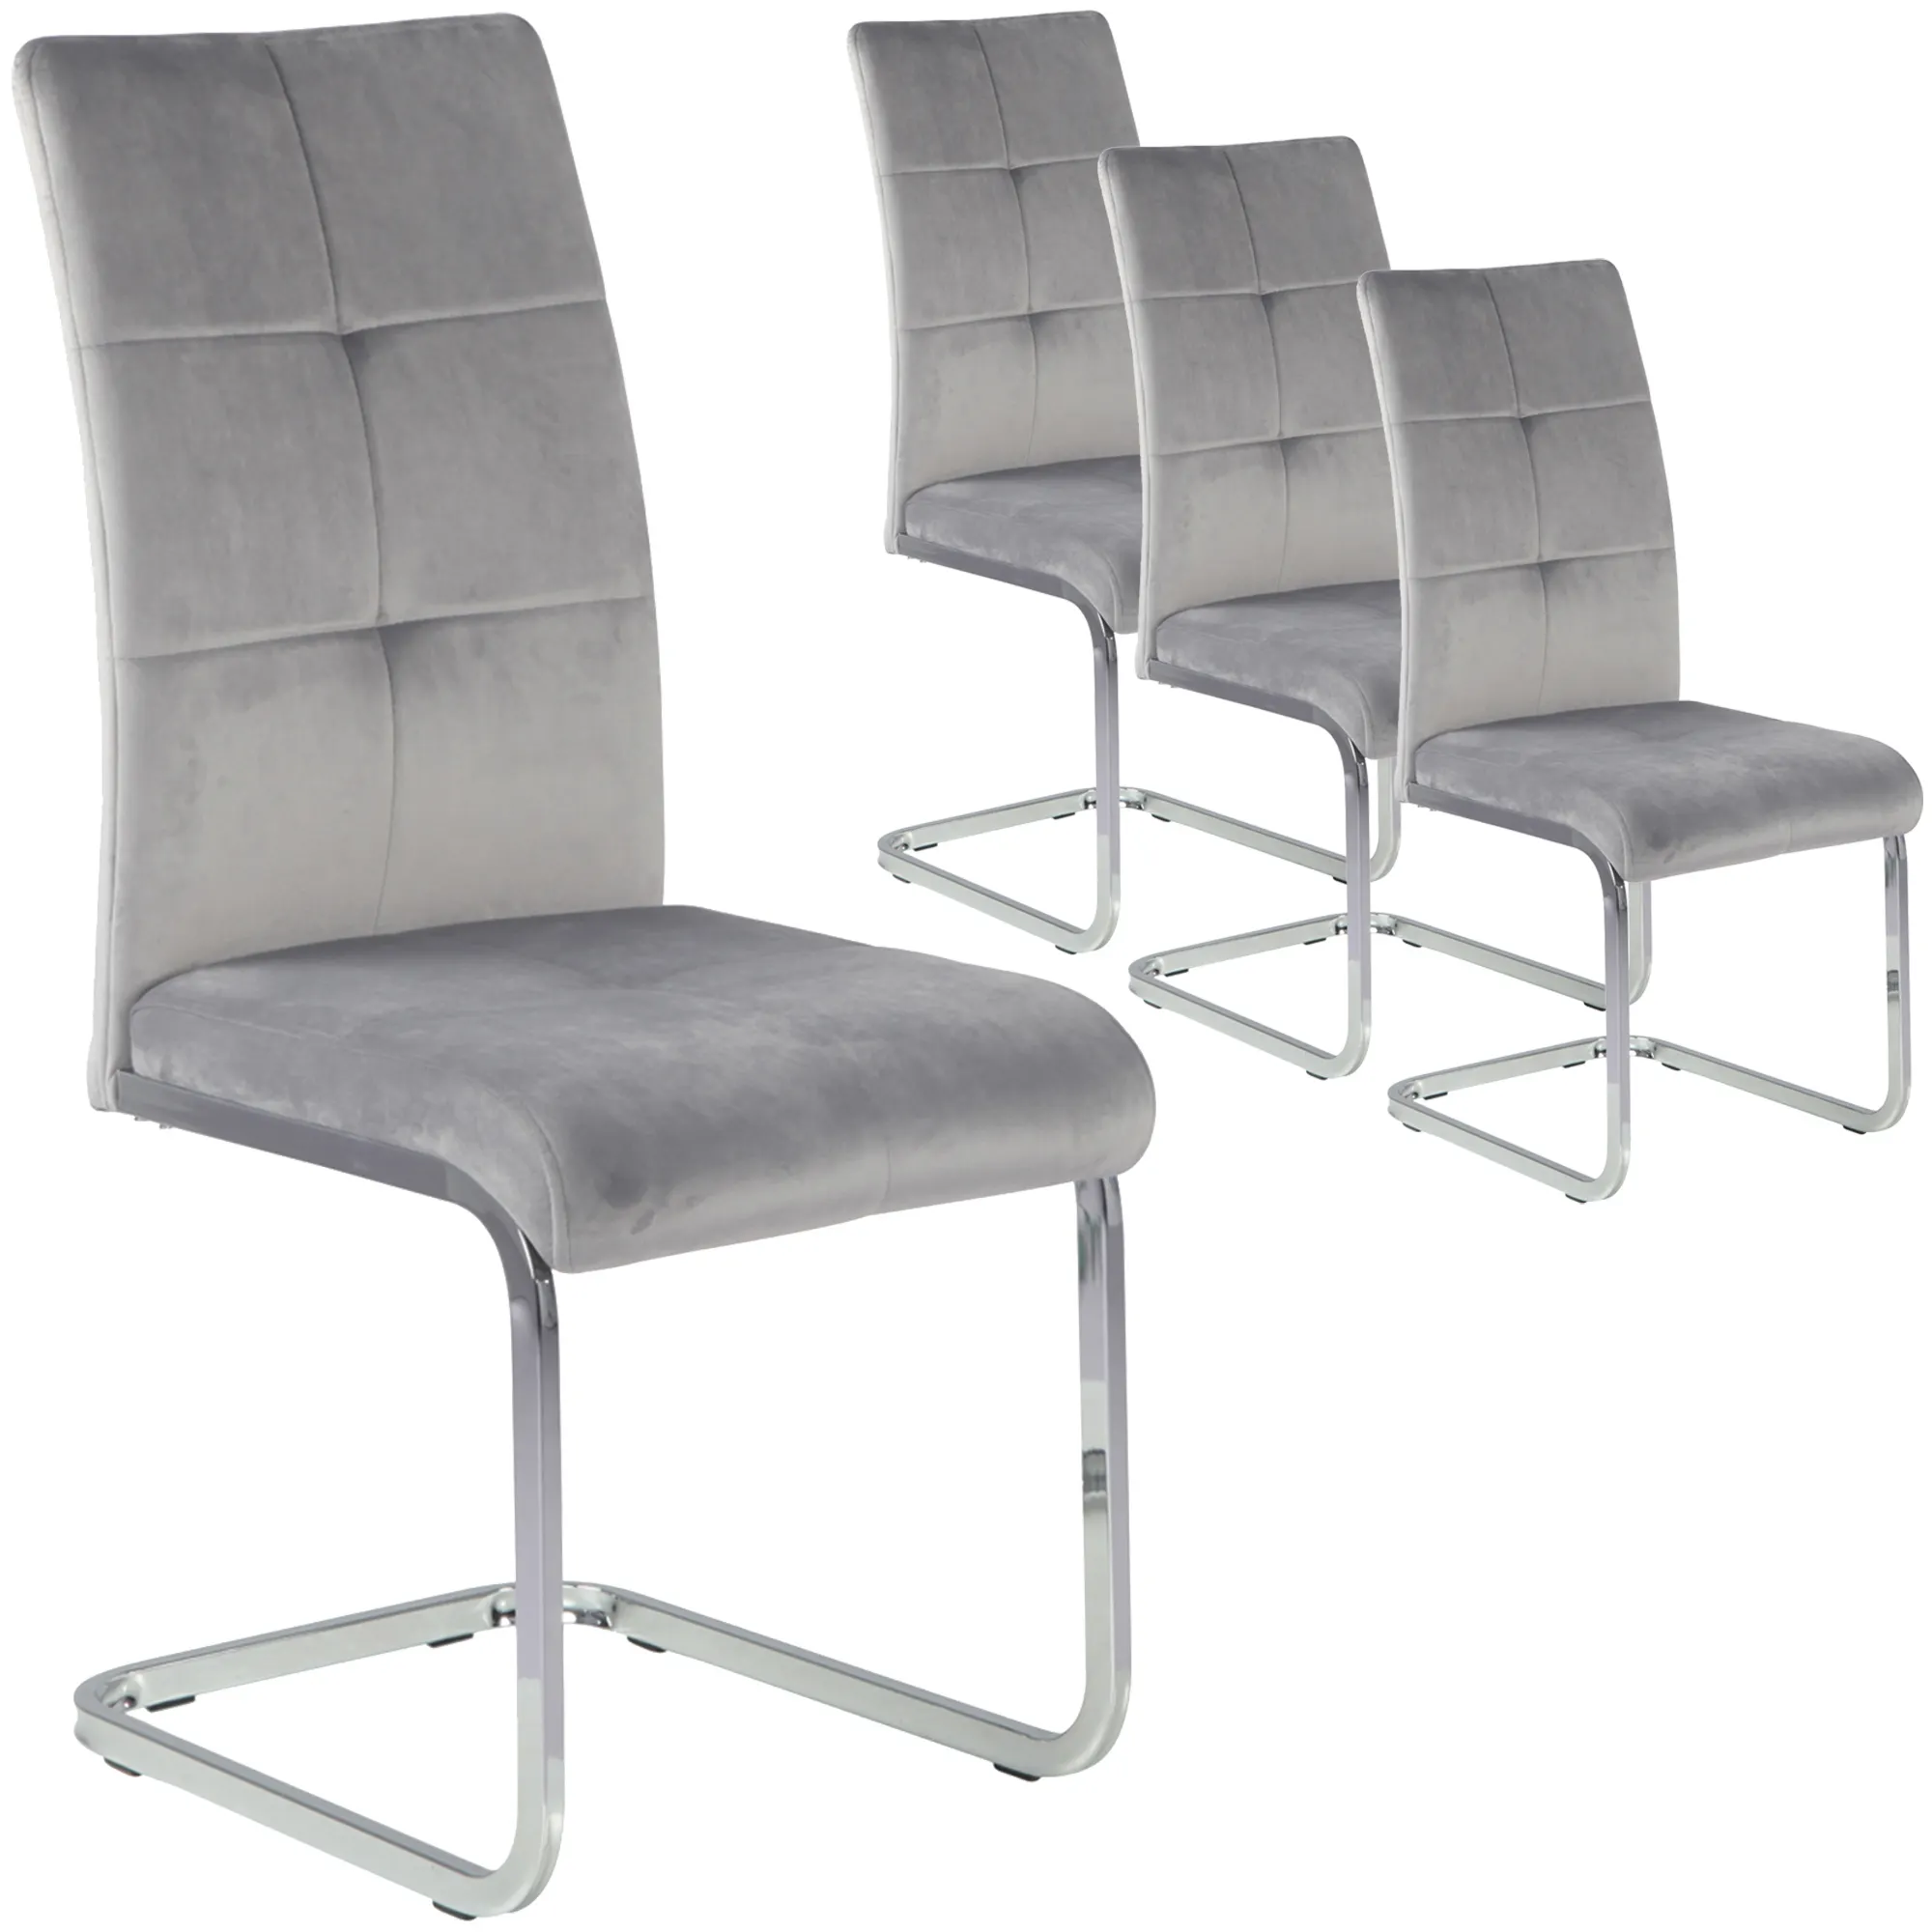 Modern cheap chromed bow shape metal base gray fabric upholstered dining room chair